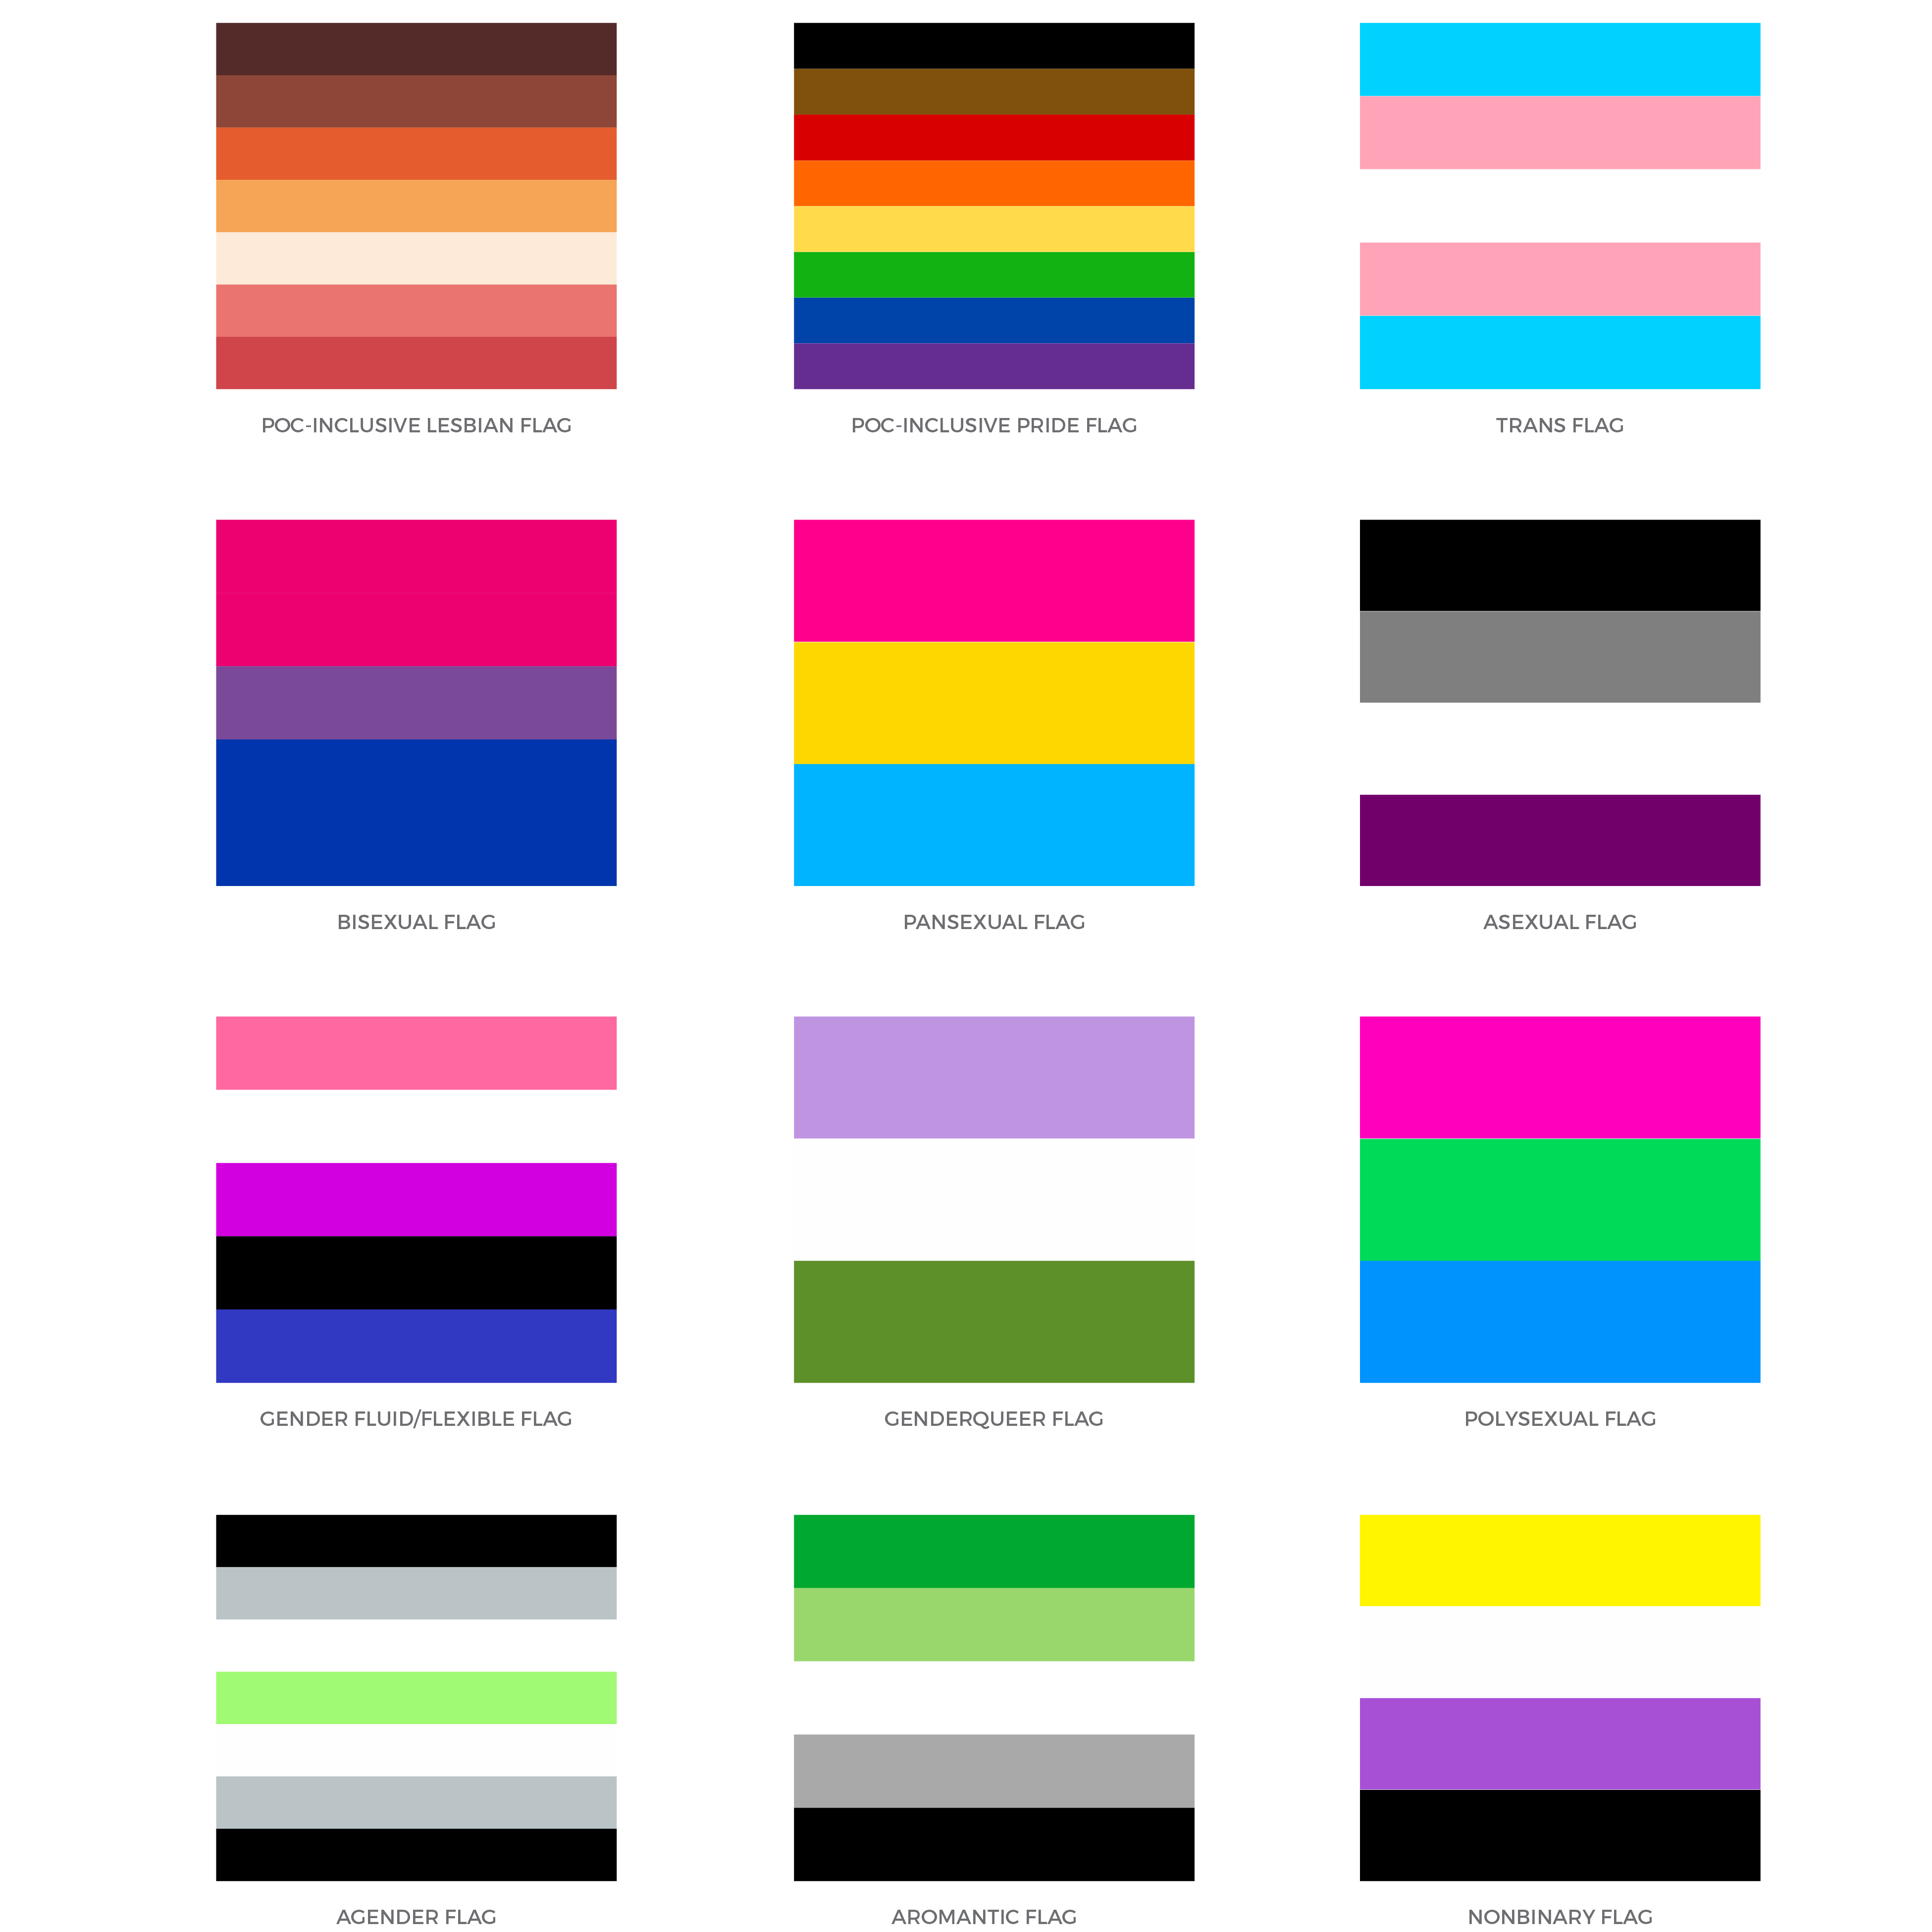 what do the new colors on the pride flag mean